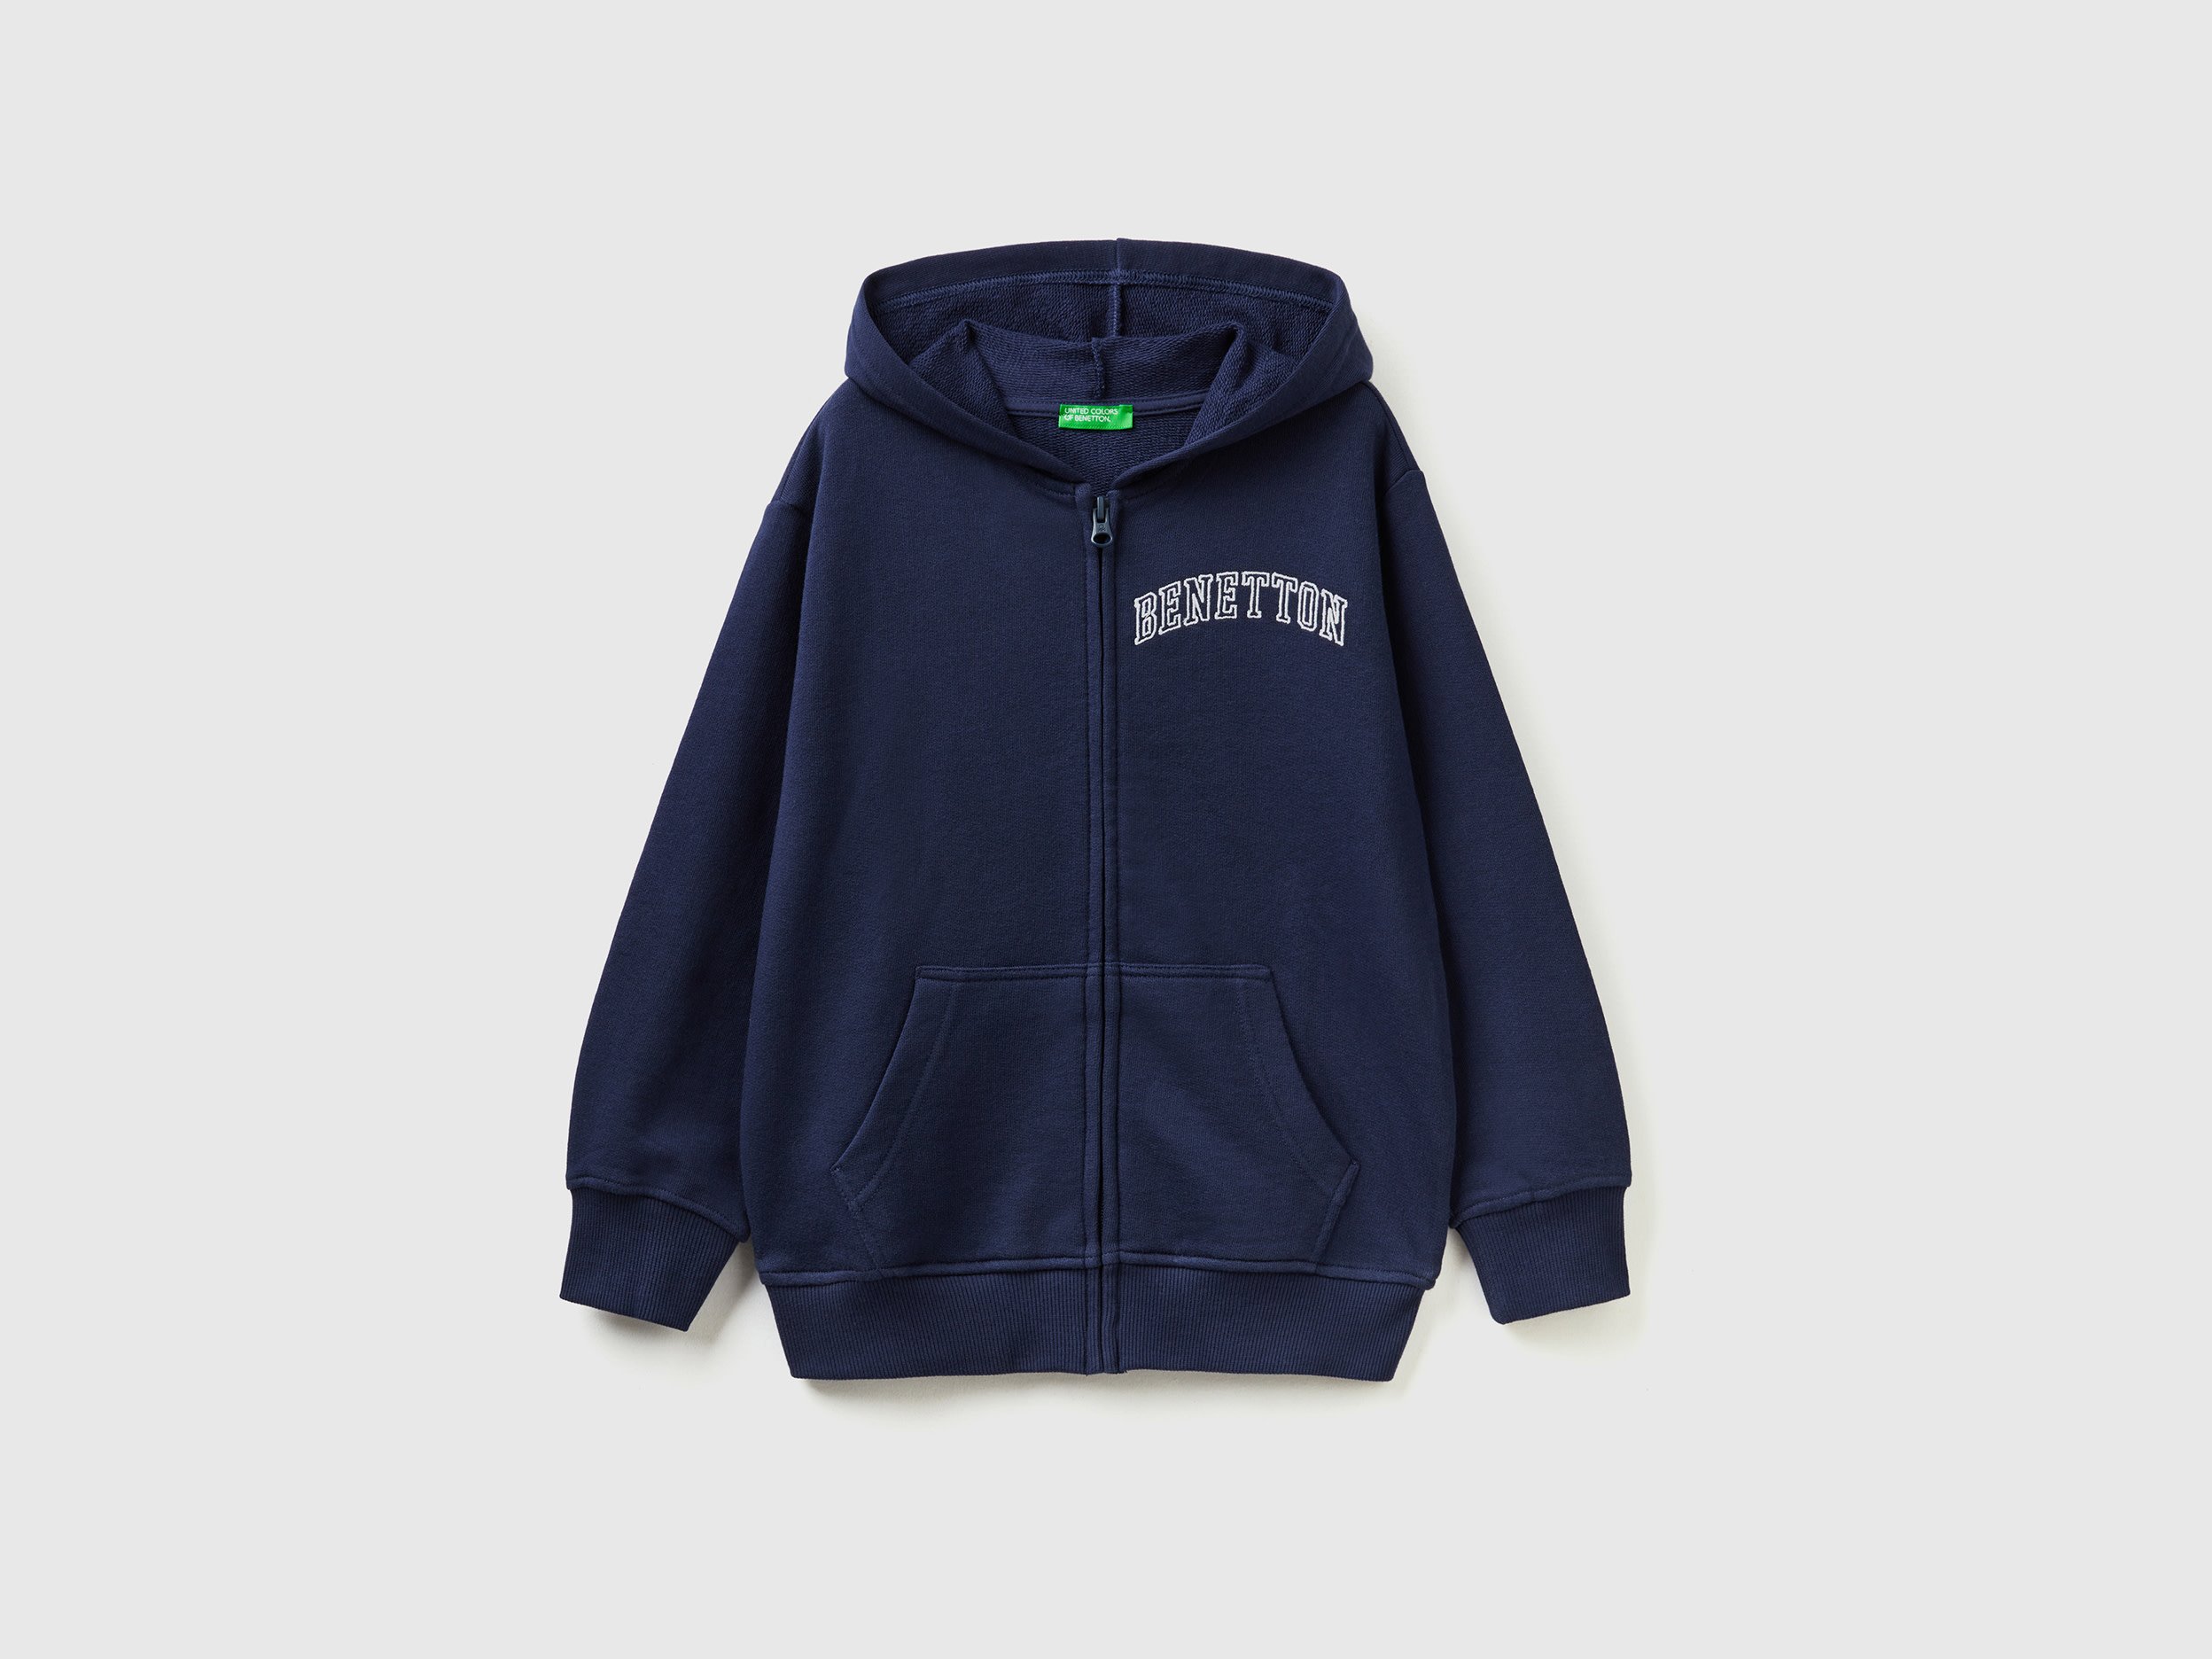 Benetton, Hoodie With Zip And Embroidered Logo, size 3XL, Dark Blue, Kids